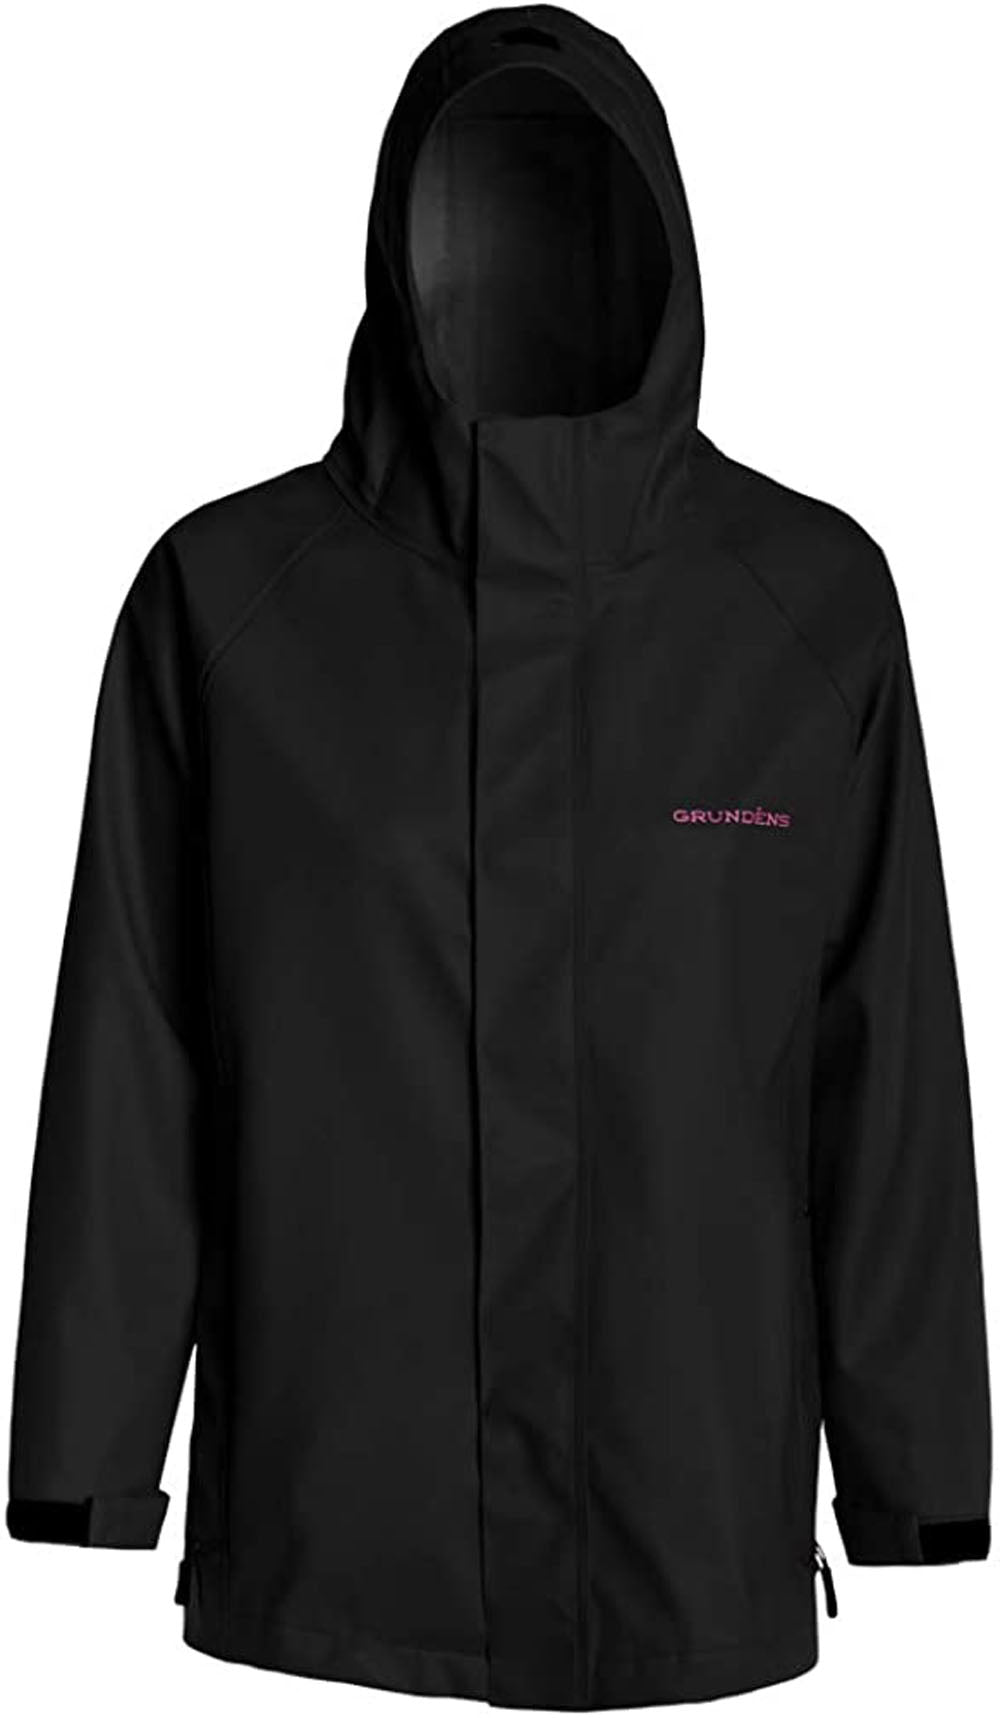 Women's Neptune Jacket in Black color from the front view